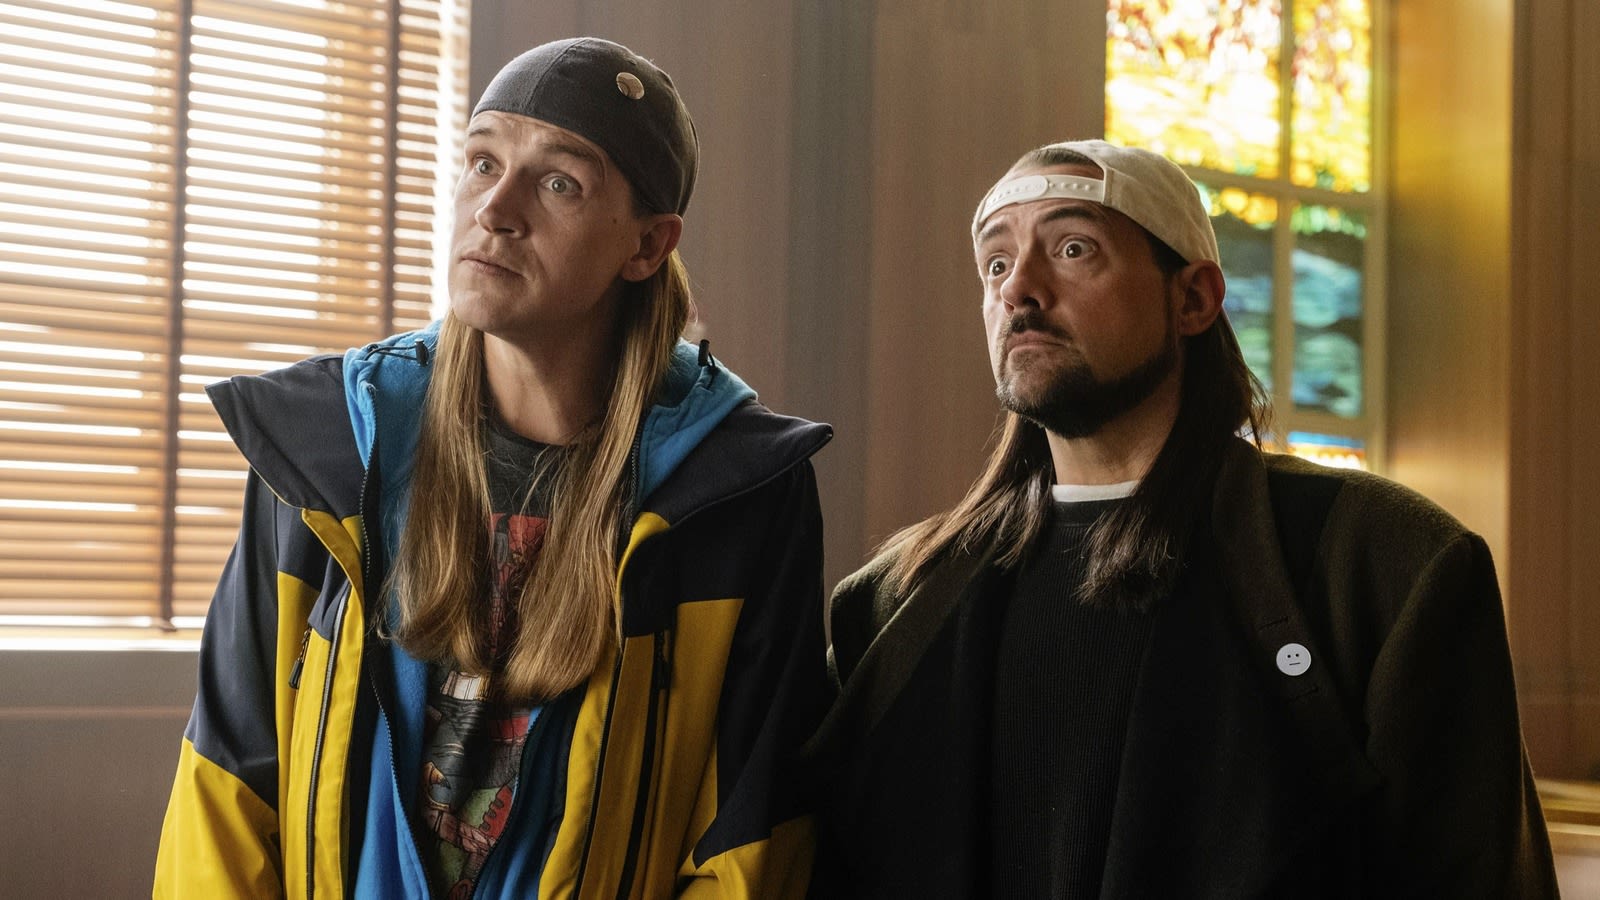 Kevin Smith's Next Jay And Silent Bob Outing Could Be A Horror Movie - SlashFilm